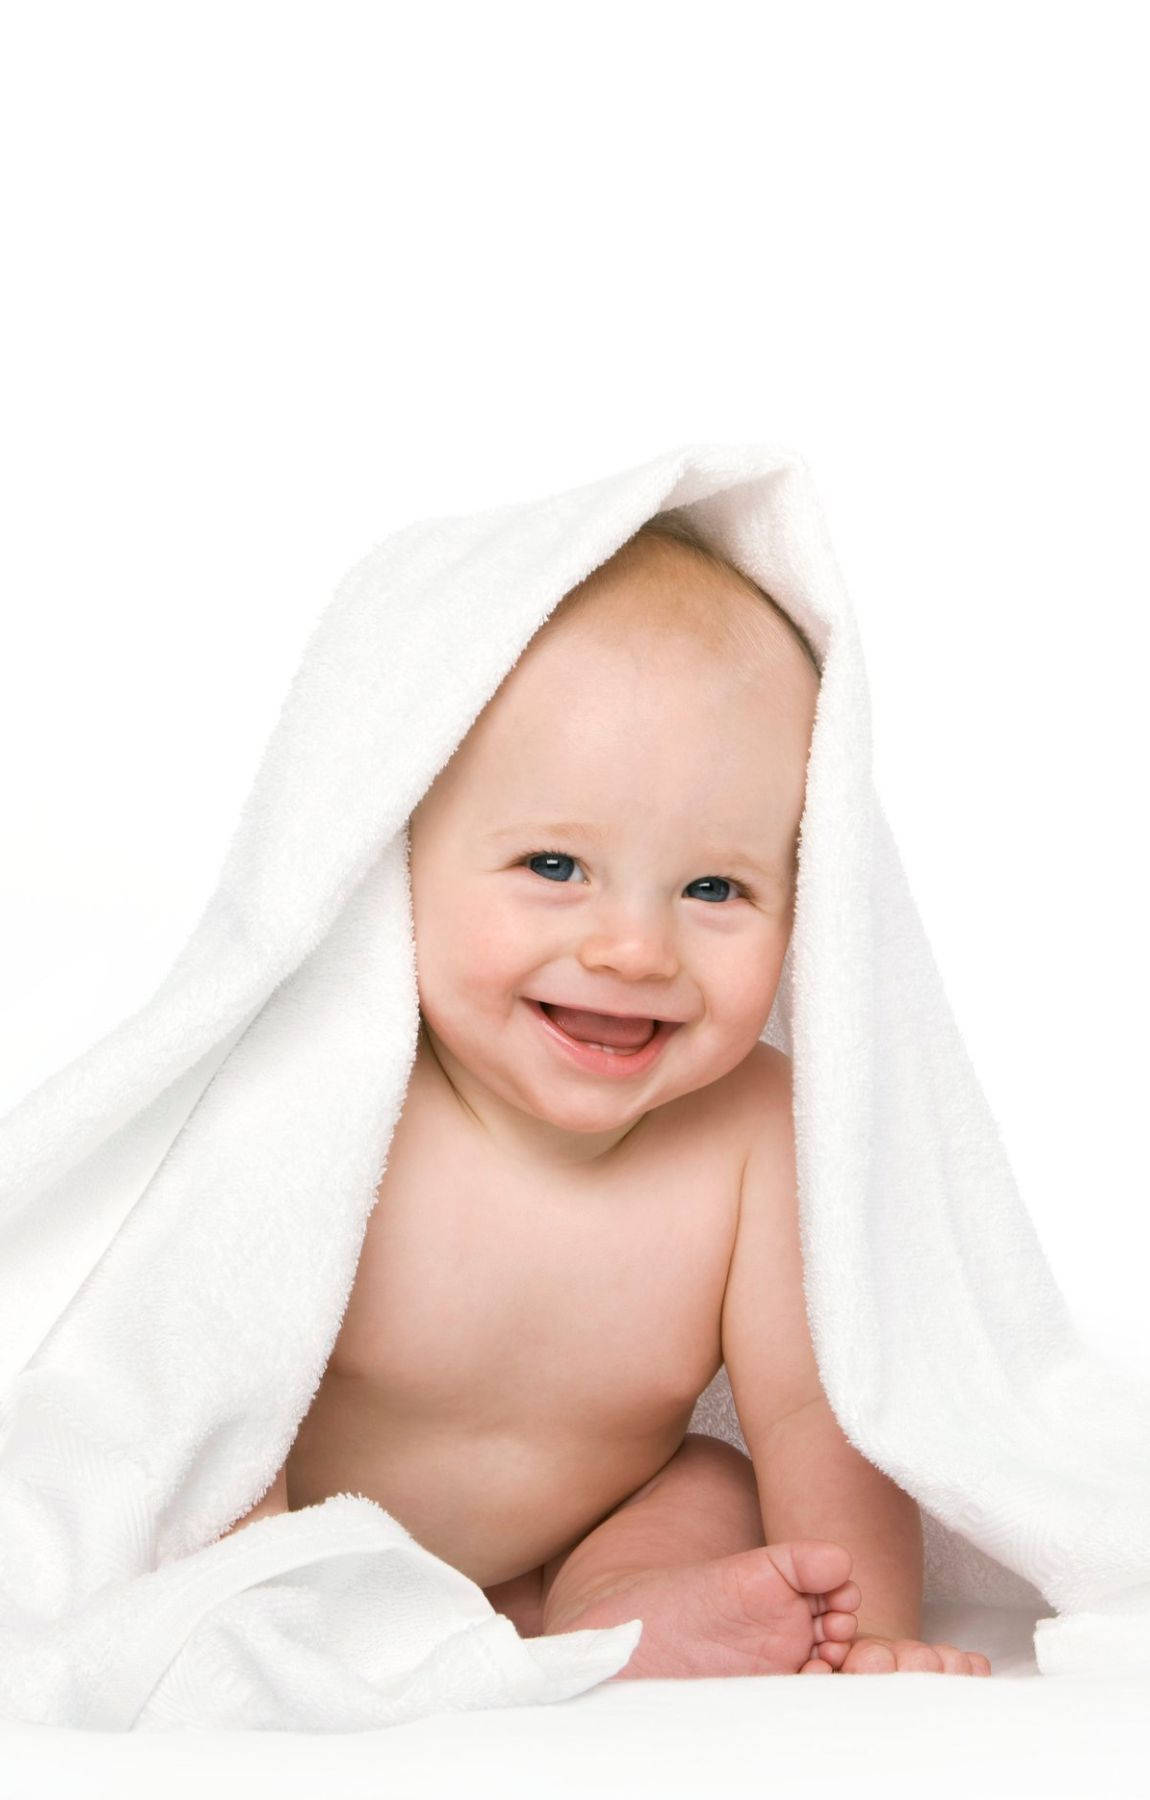 Baby Photography Smiling Under White Cloth Wallpaper